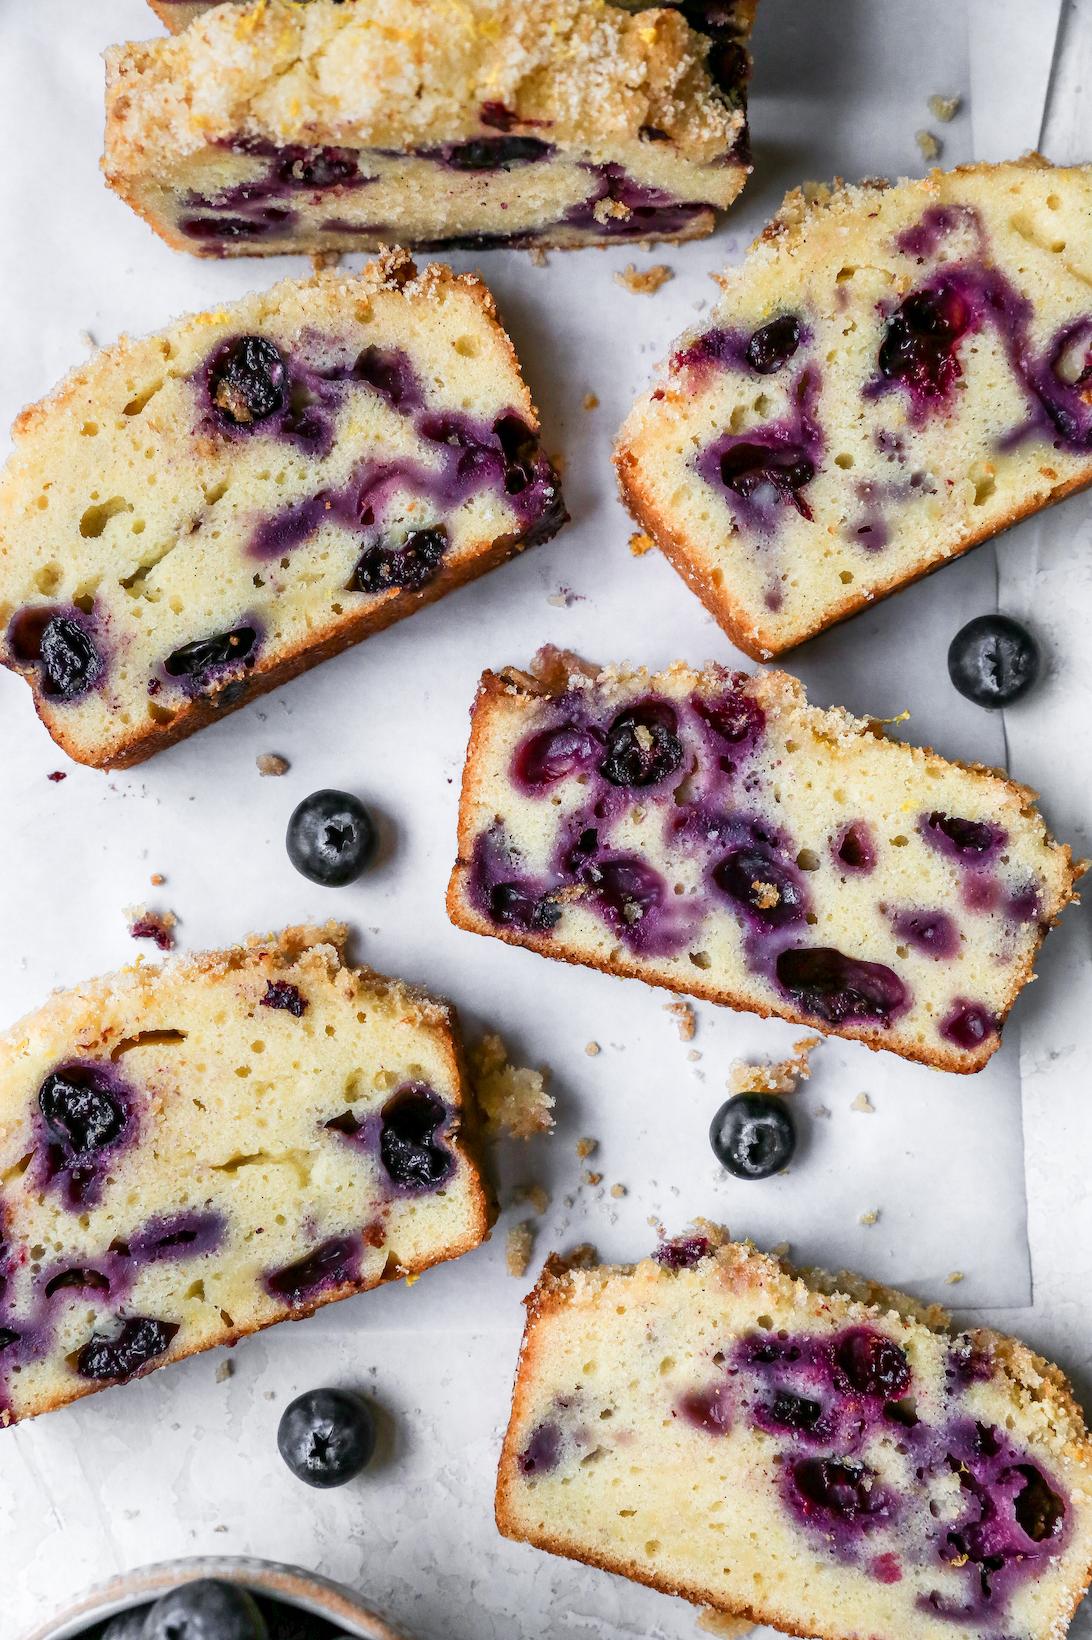  Each slice of this cake is bursting with juicy, plump blueberries and moist, buttery cake.